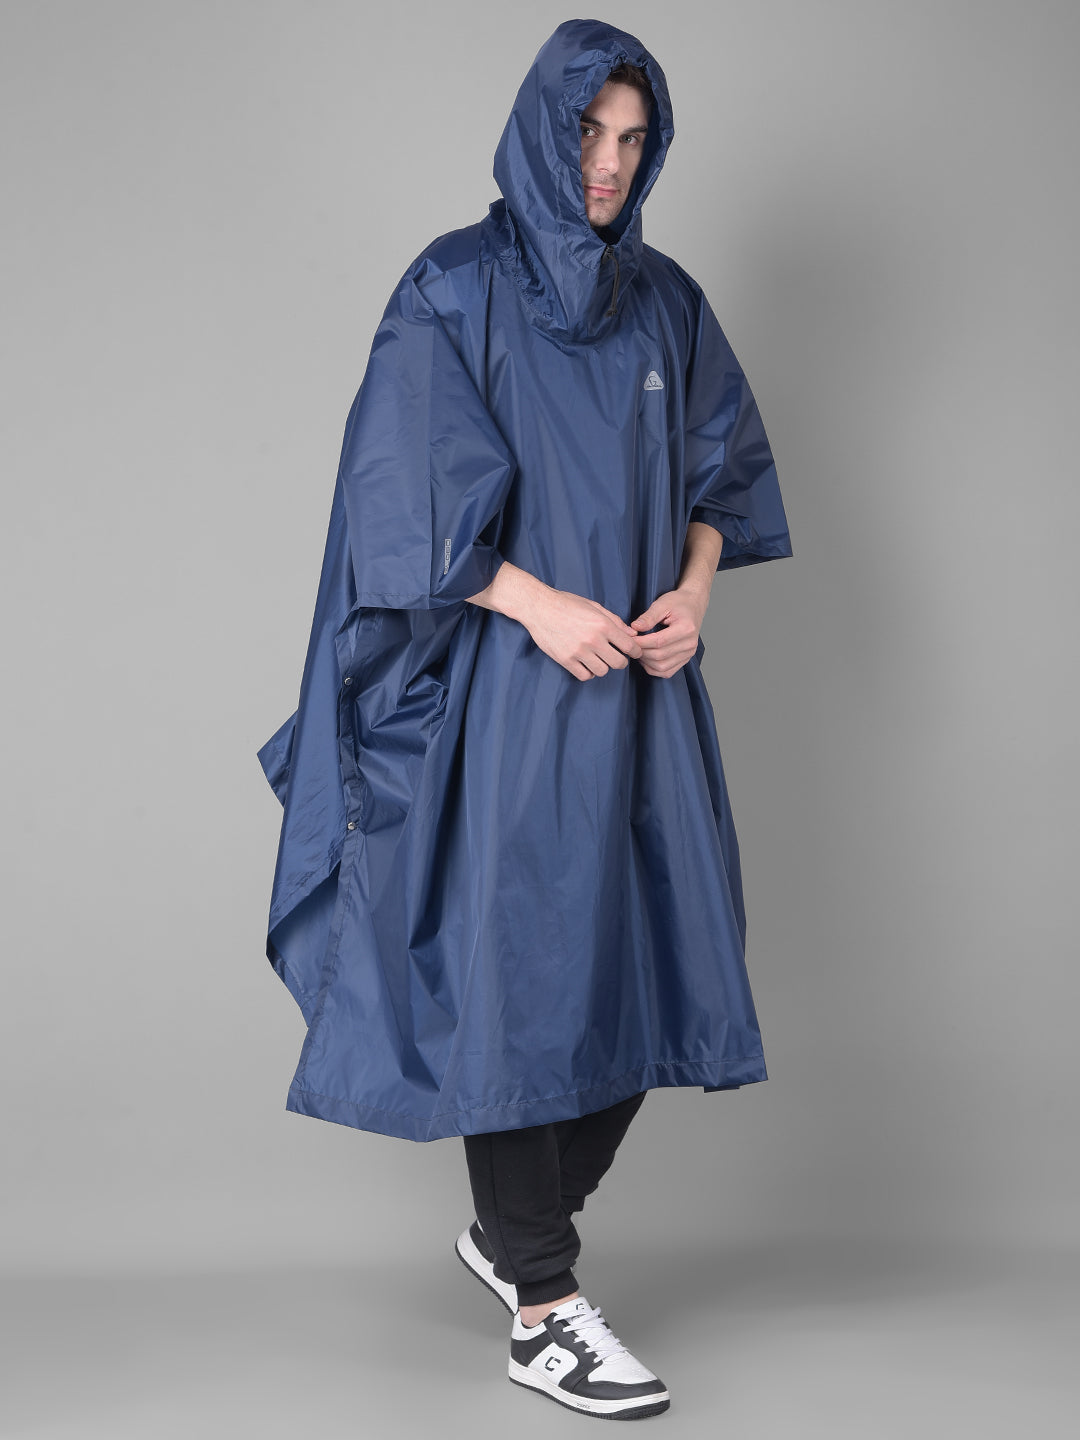 GLOBO Navy Unisex Outdoor Lightweight Rain Poncho for Fashionable Waterproof Weather Protection - Navy, Large